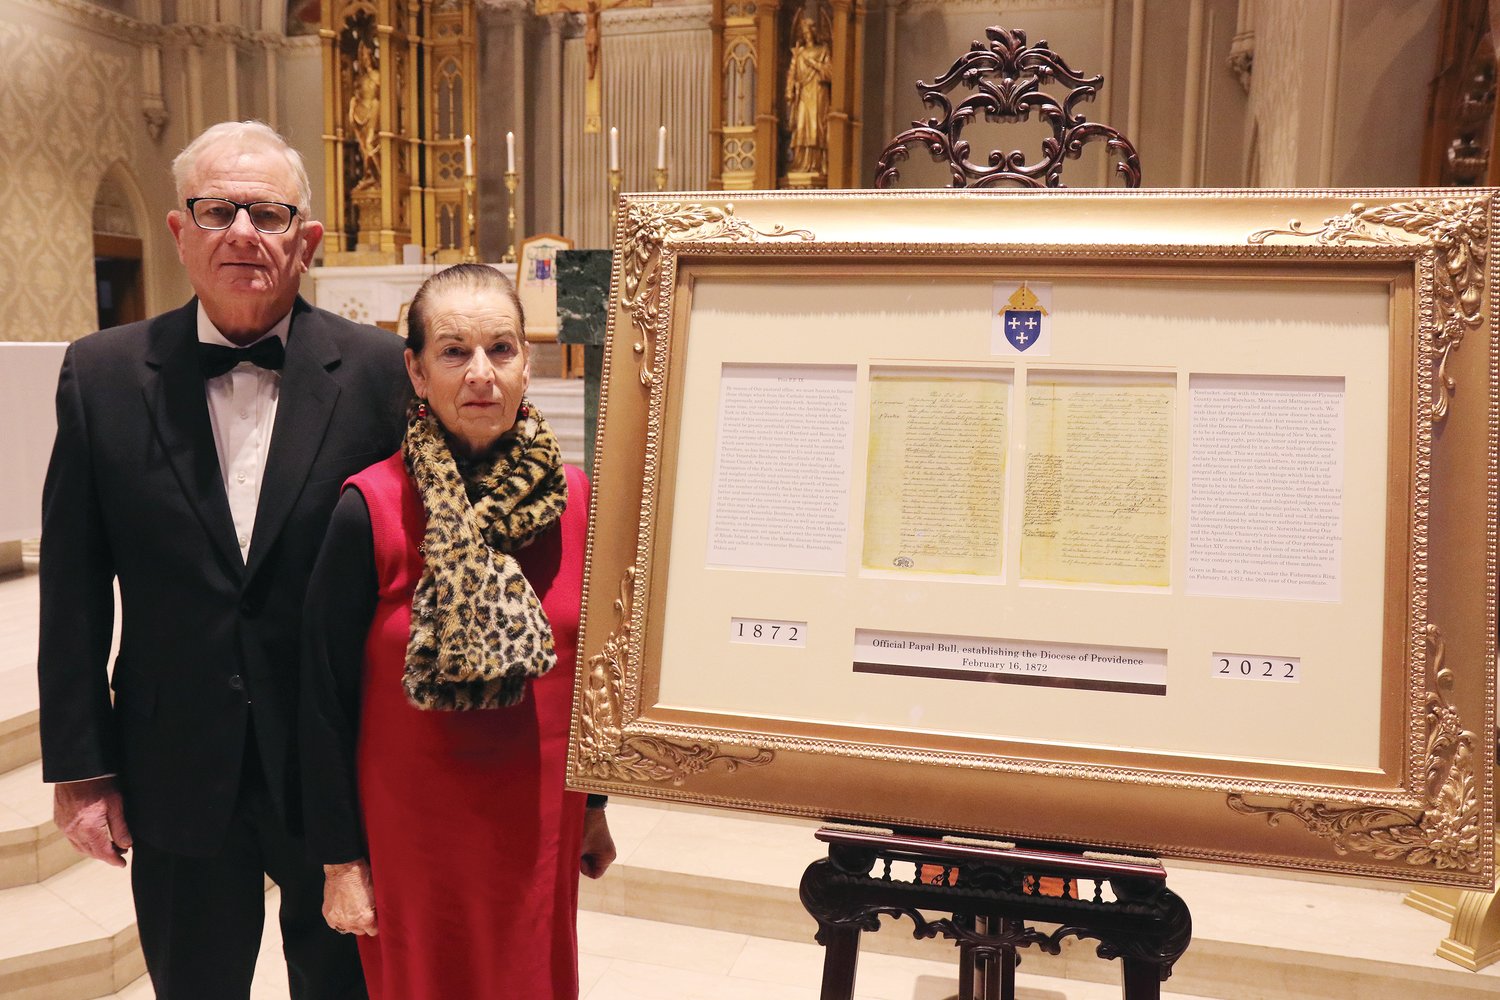 The bishop also acknowledged Thomas H. Lynch, pictured at left with his wife Rose, the artist designer who designed and executed the frame displaying the historical document.